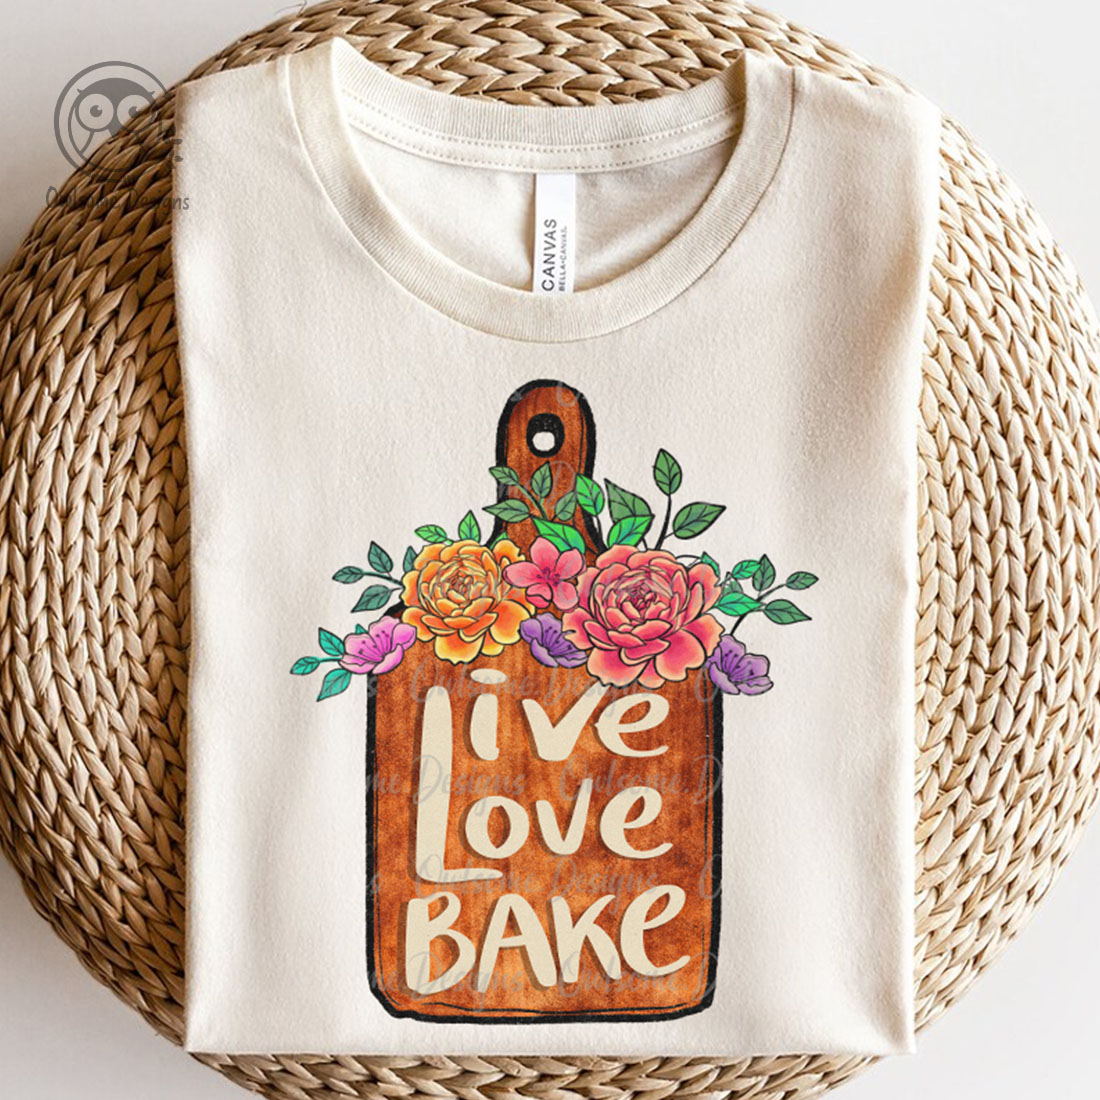 Image of a t-shirt with an enchanting cutting board print.